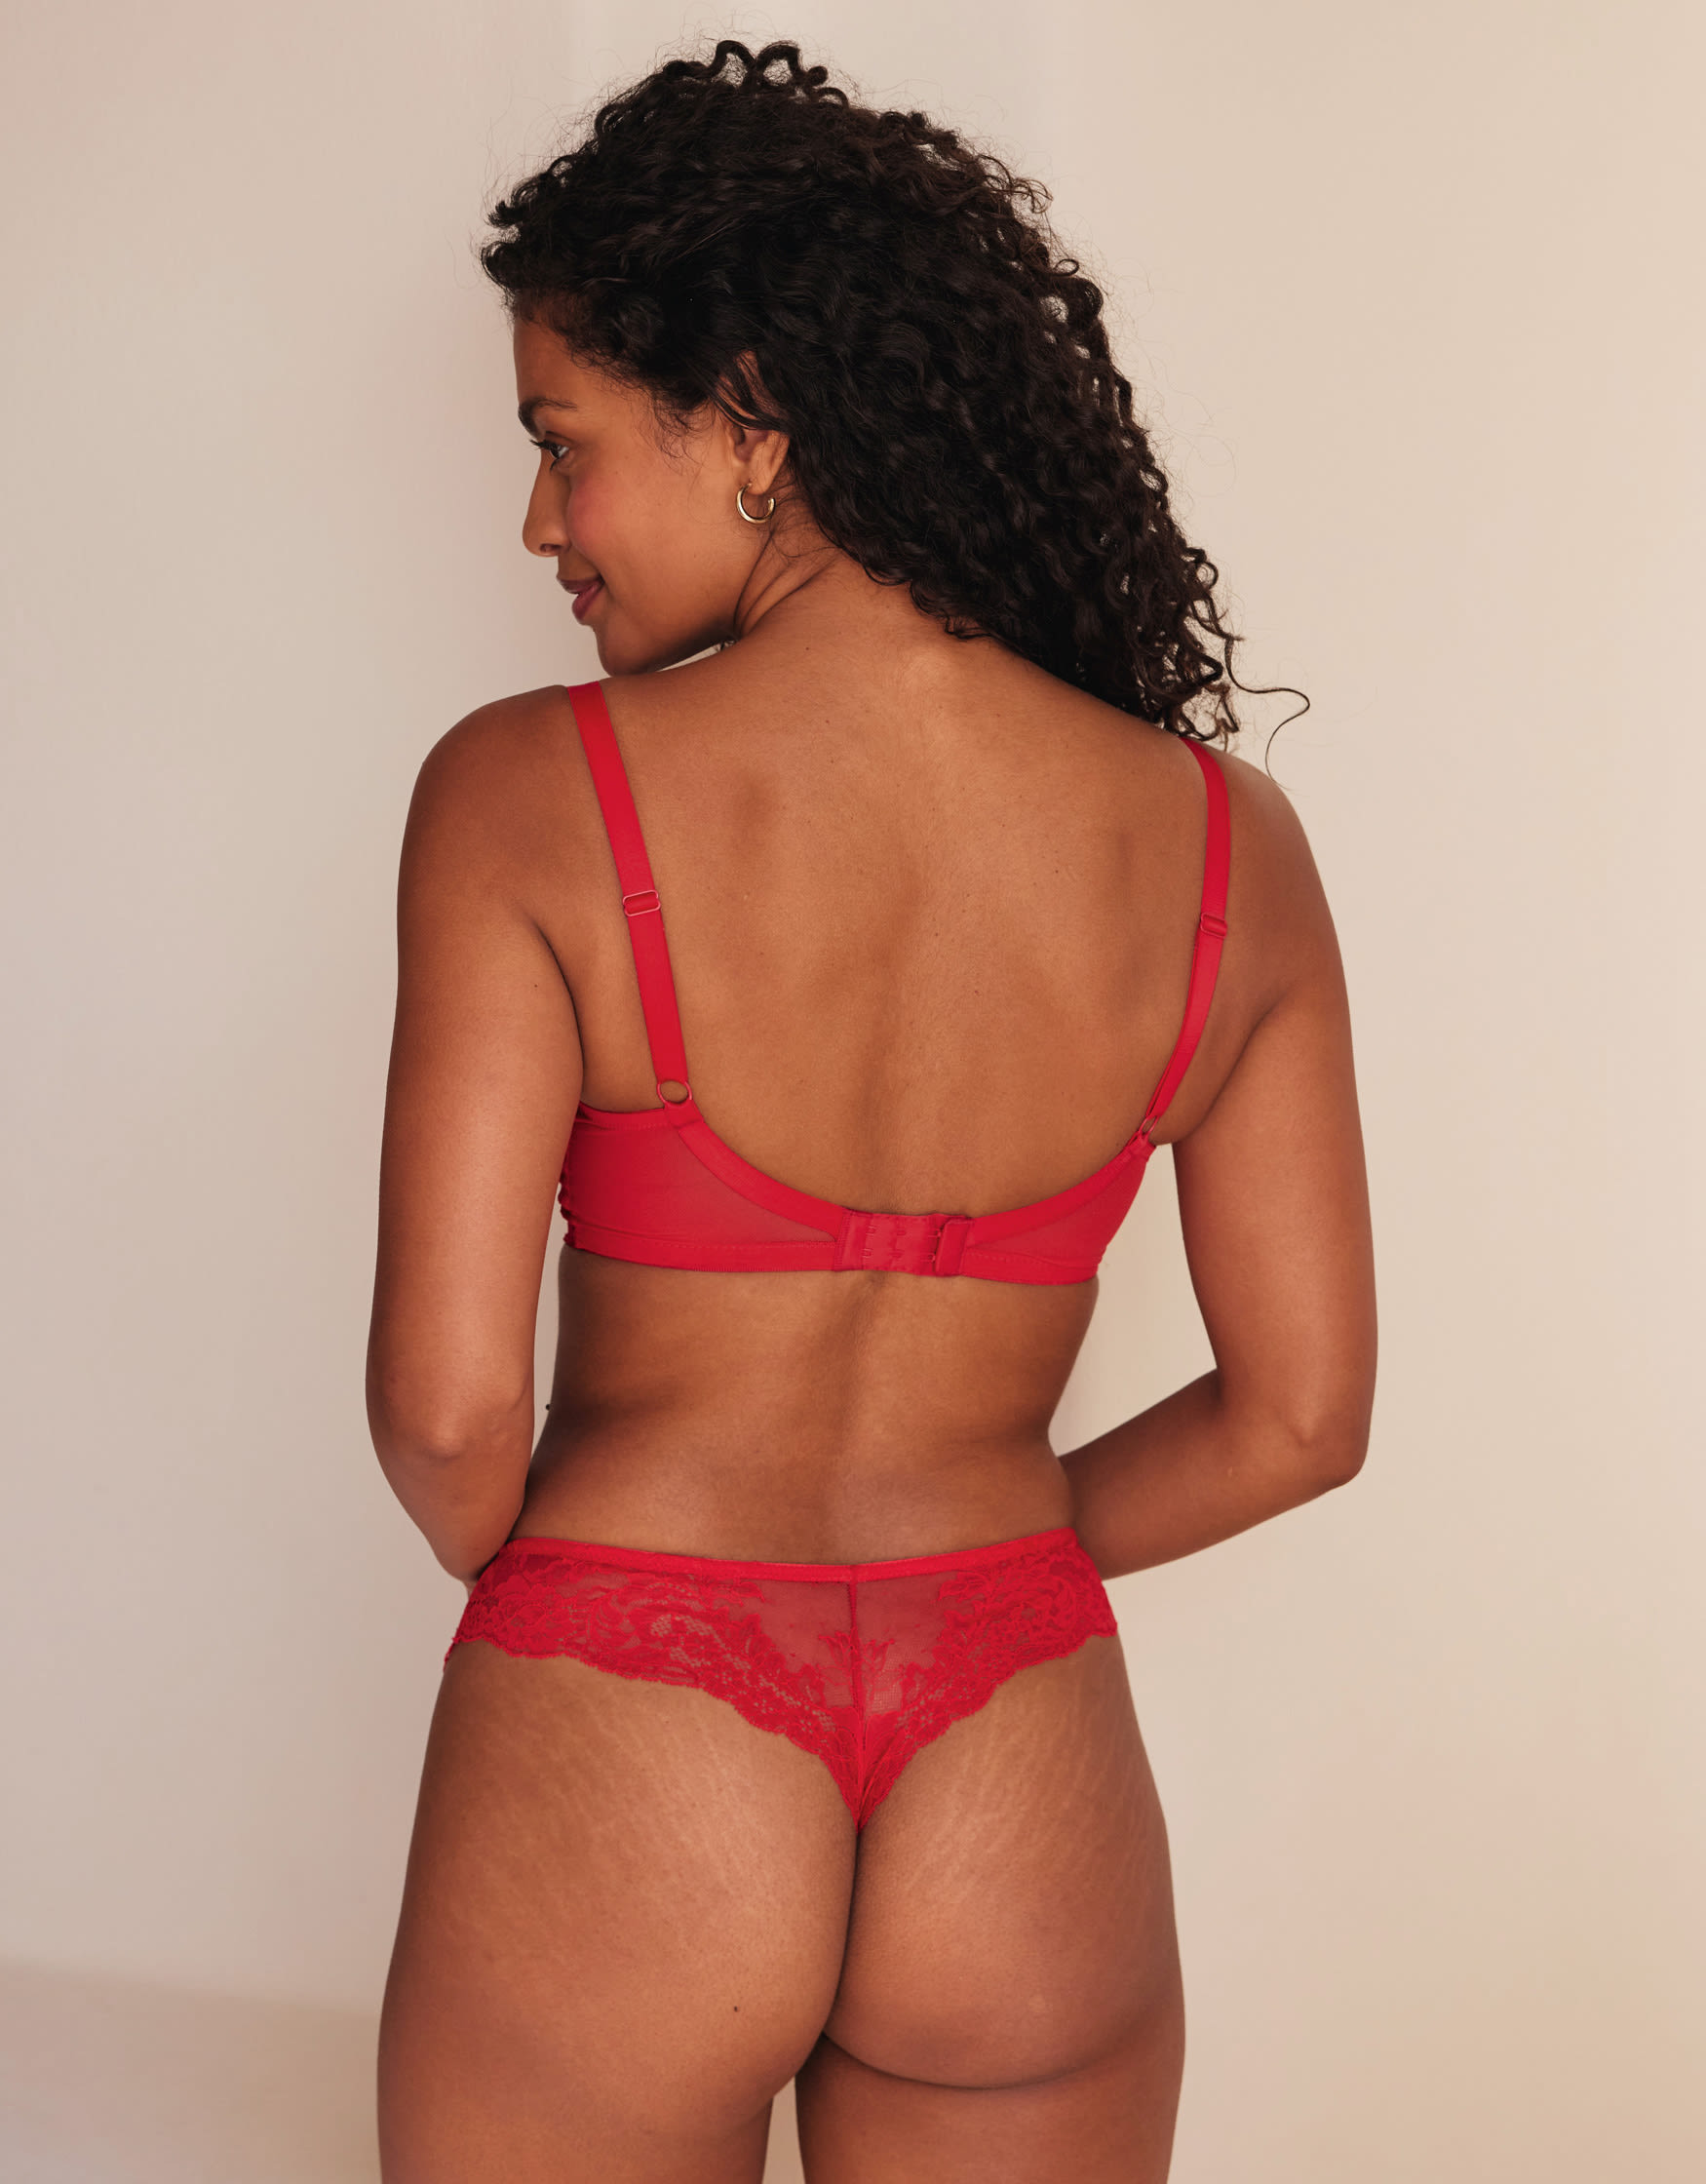 Shop for J CUP, Red, Lingerie